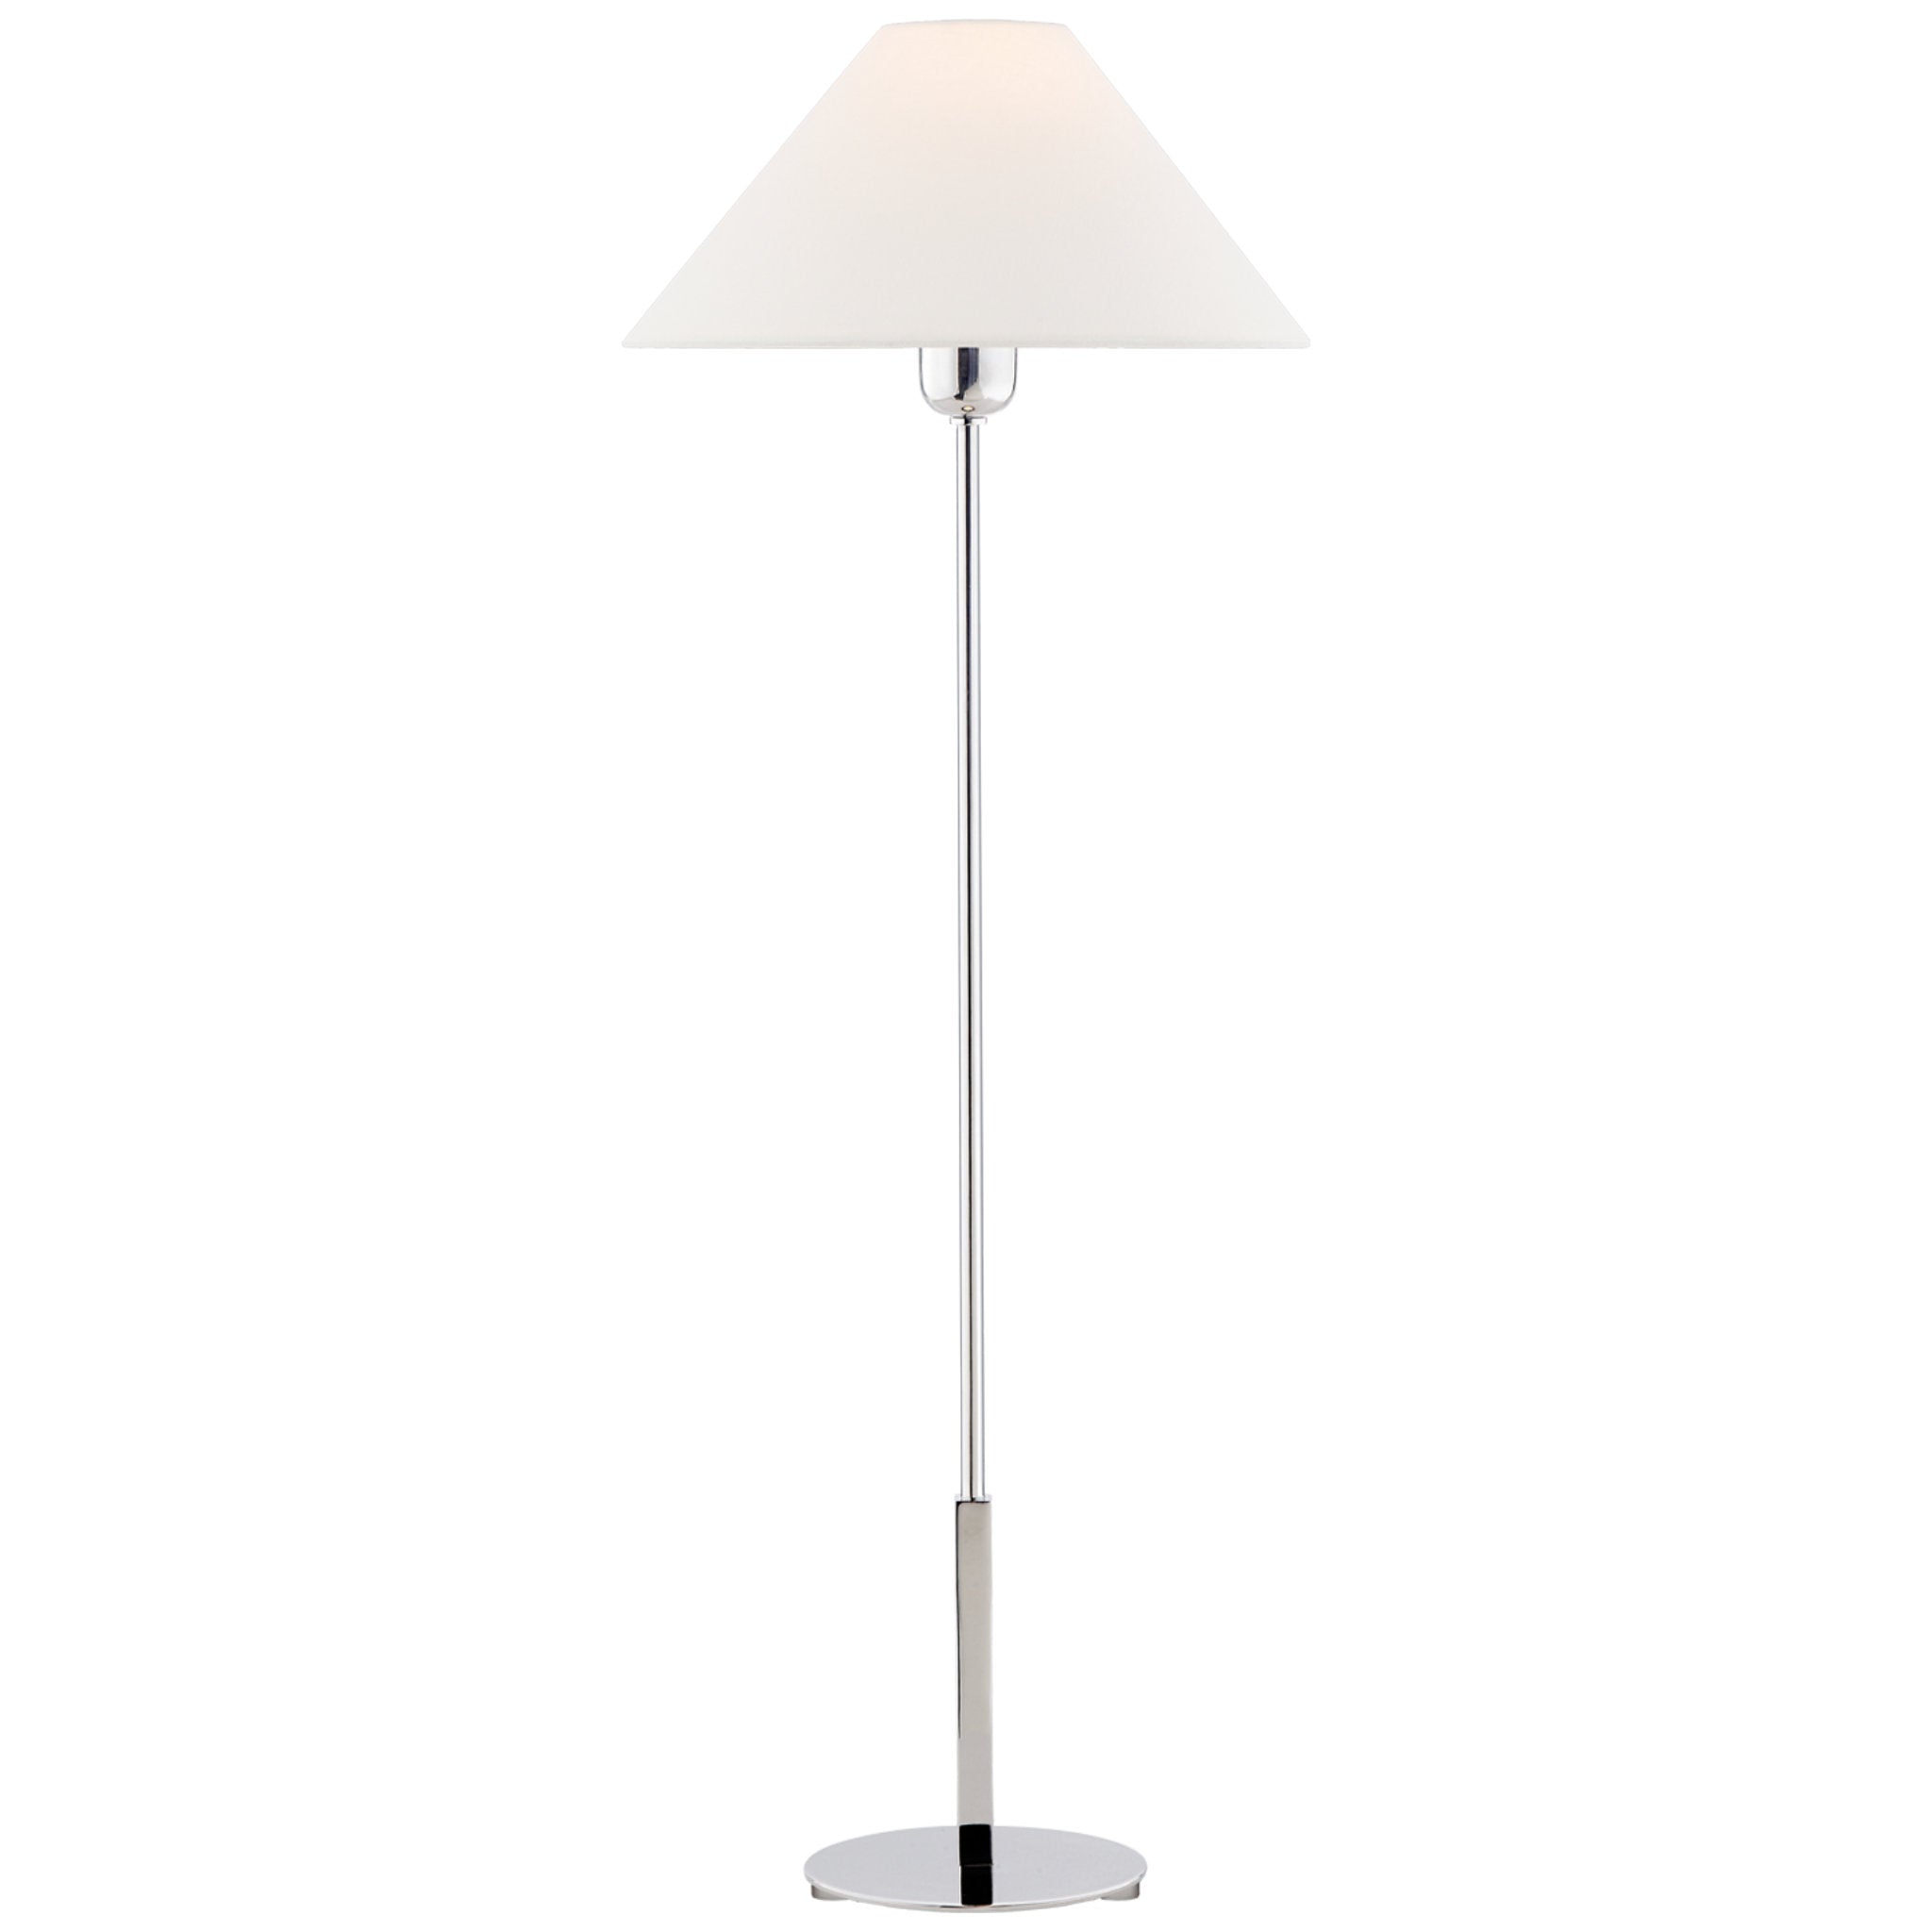 J. Randall Powers Hackney Buffet Lamp in Polished Nickel with Linen Shade